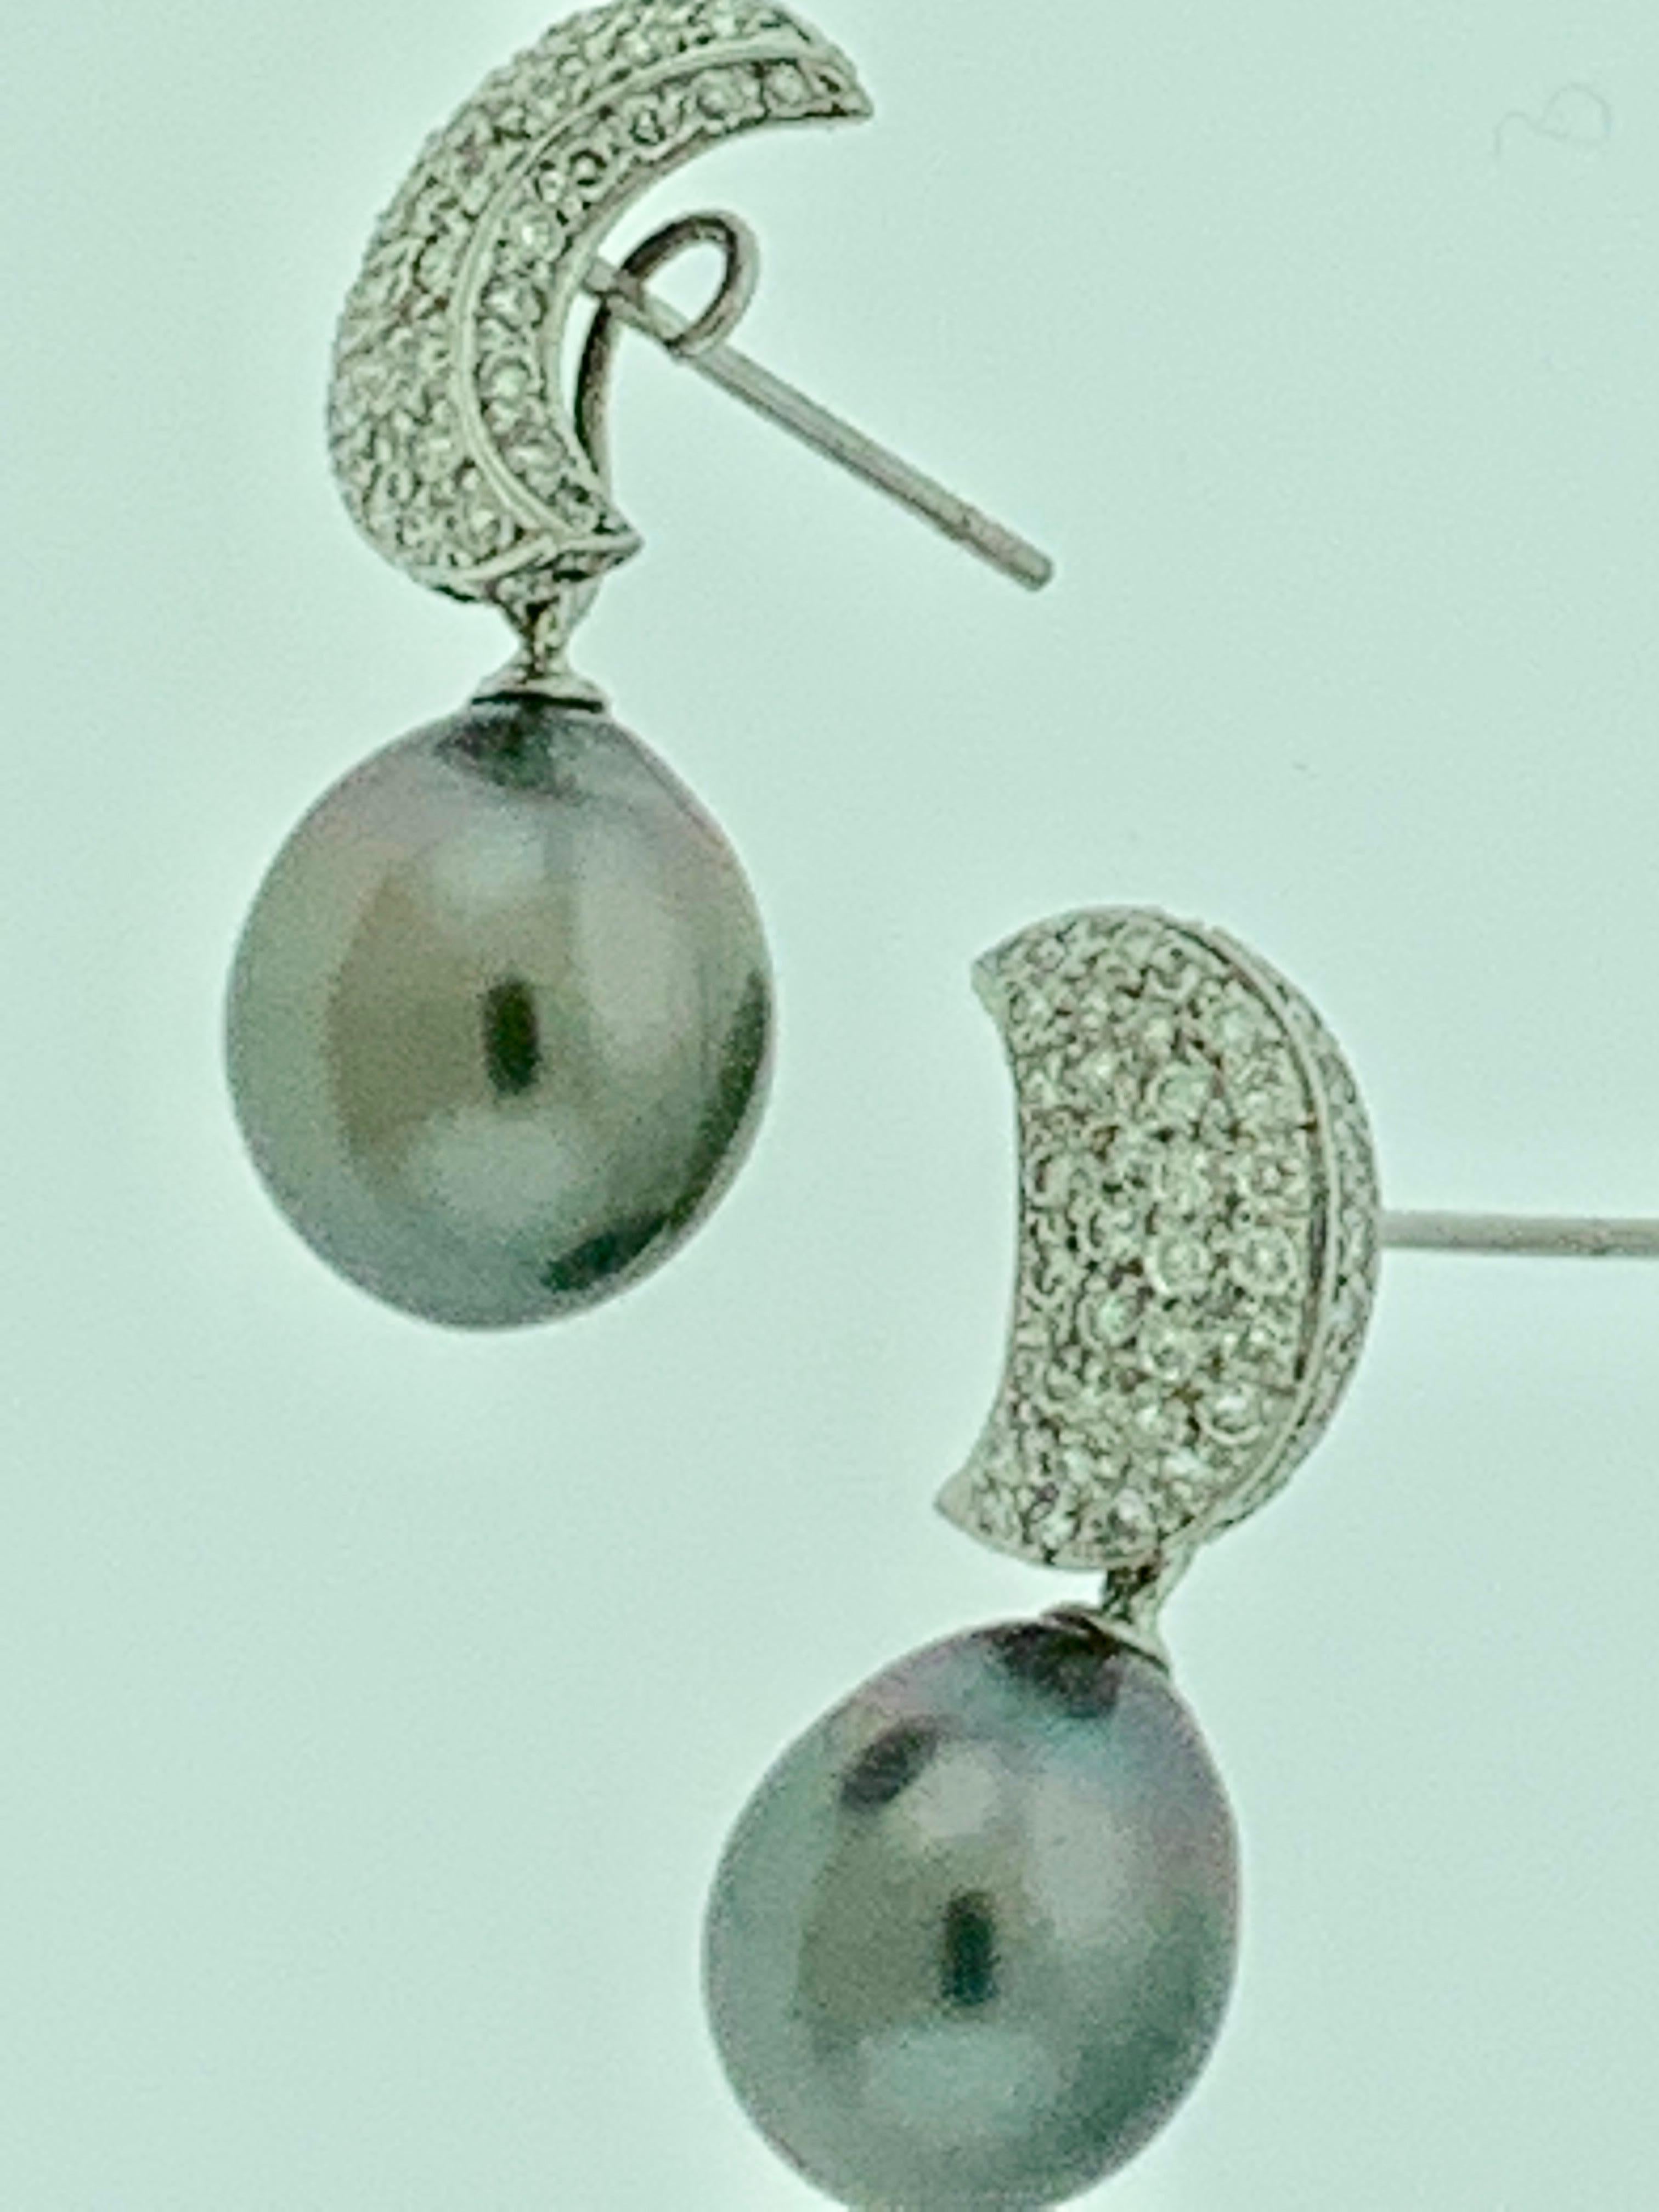 
A beautiful pair of 8-9 mm Tahitian South Sea cultured pearl earrings with gorgeous 18K gold mountings. 
Black Tahitian Cocktail Earrings With Diamonds 18 Karat White Gold 
All pearls are absolutely clean with no blemishes .Approximately 8 mm